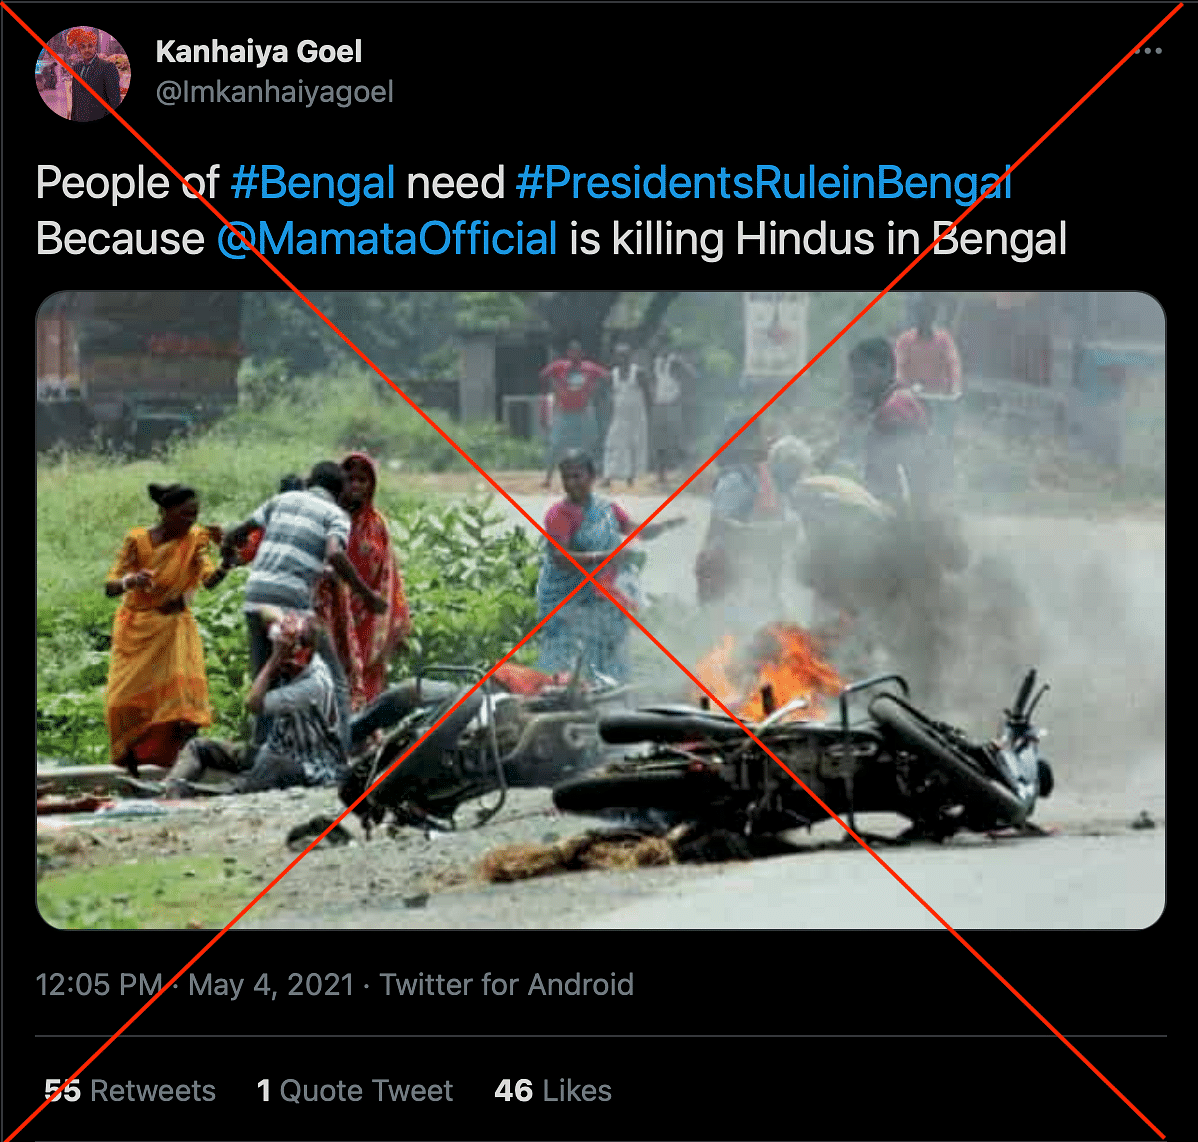 Several incidents of violence have been reported from West Bengal after results were announced on 2 May. 